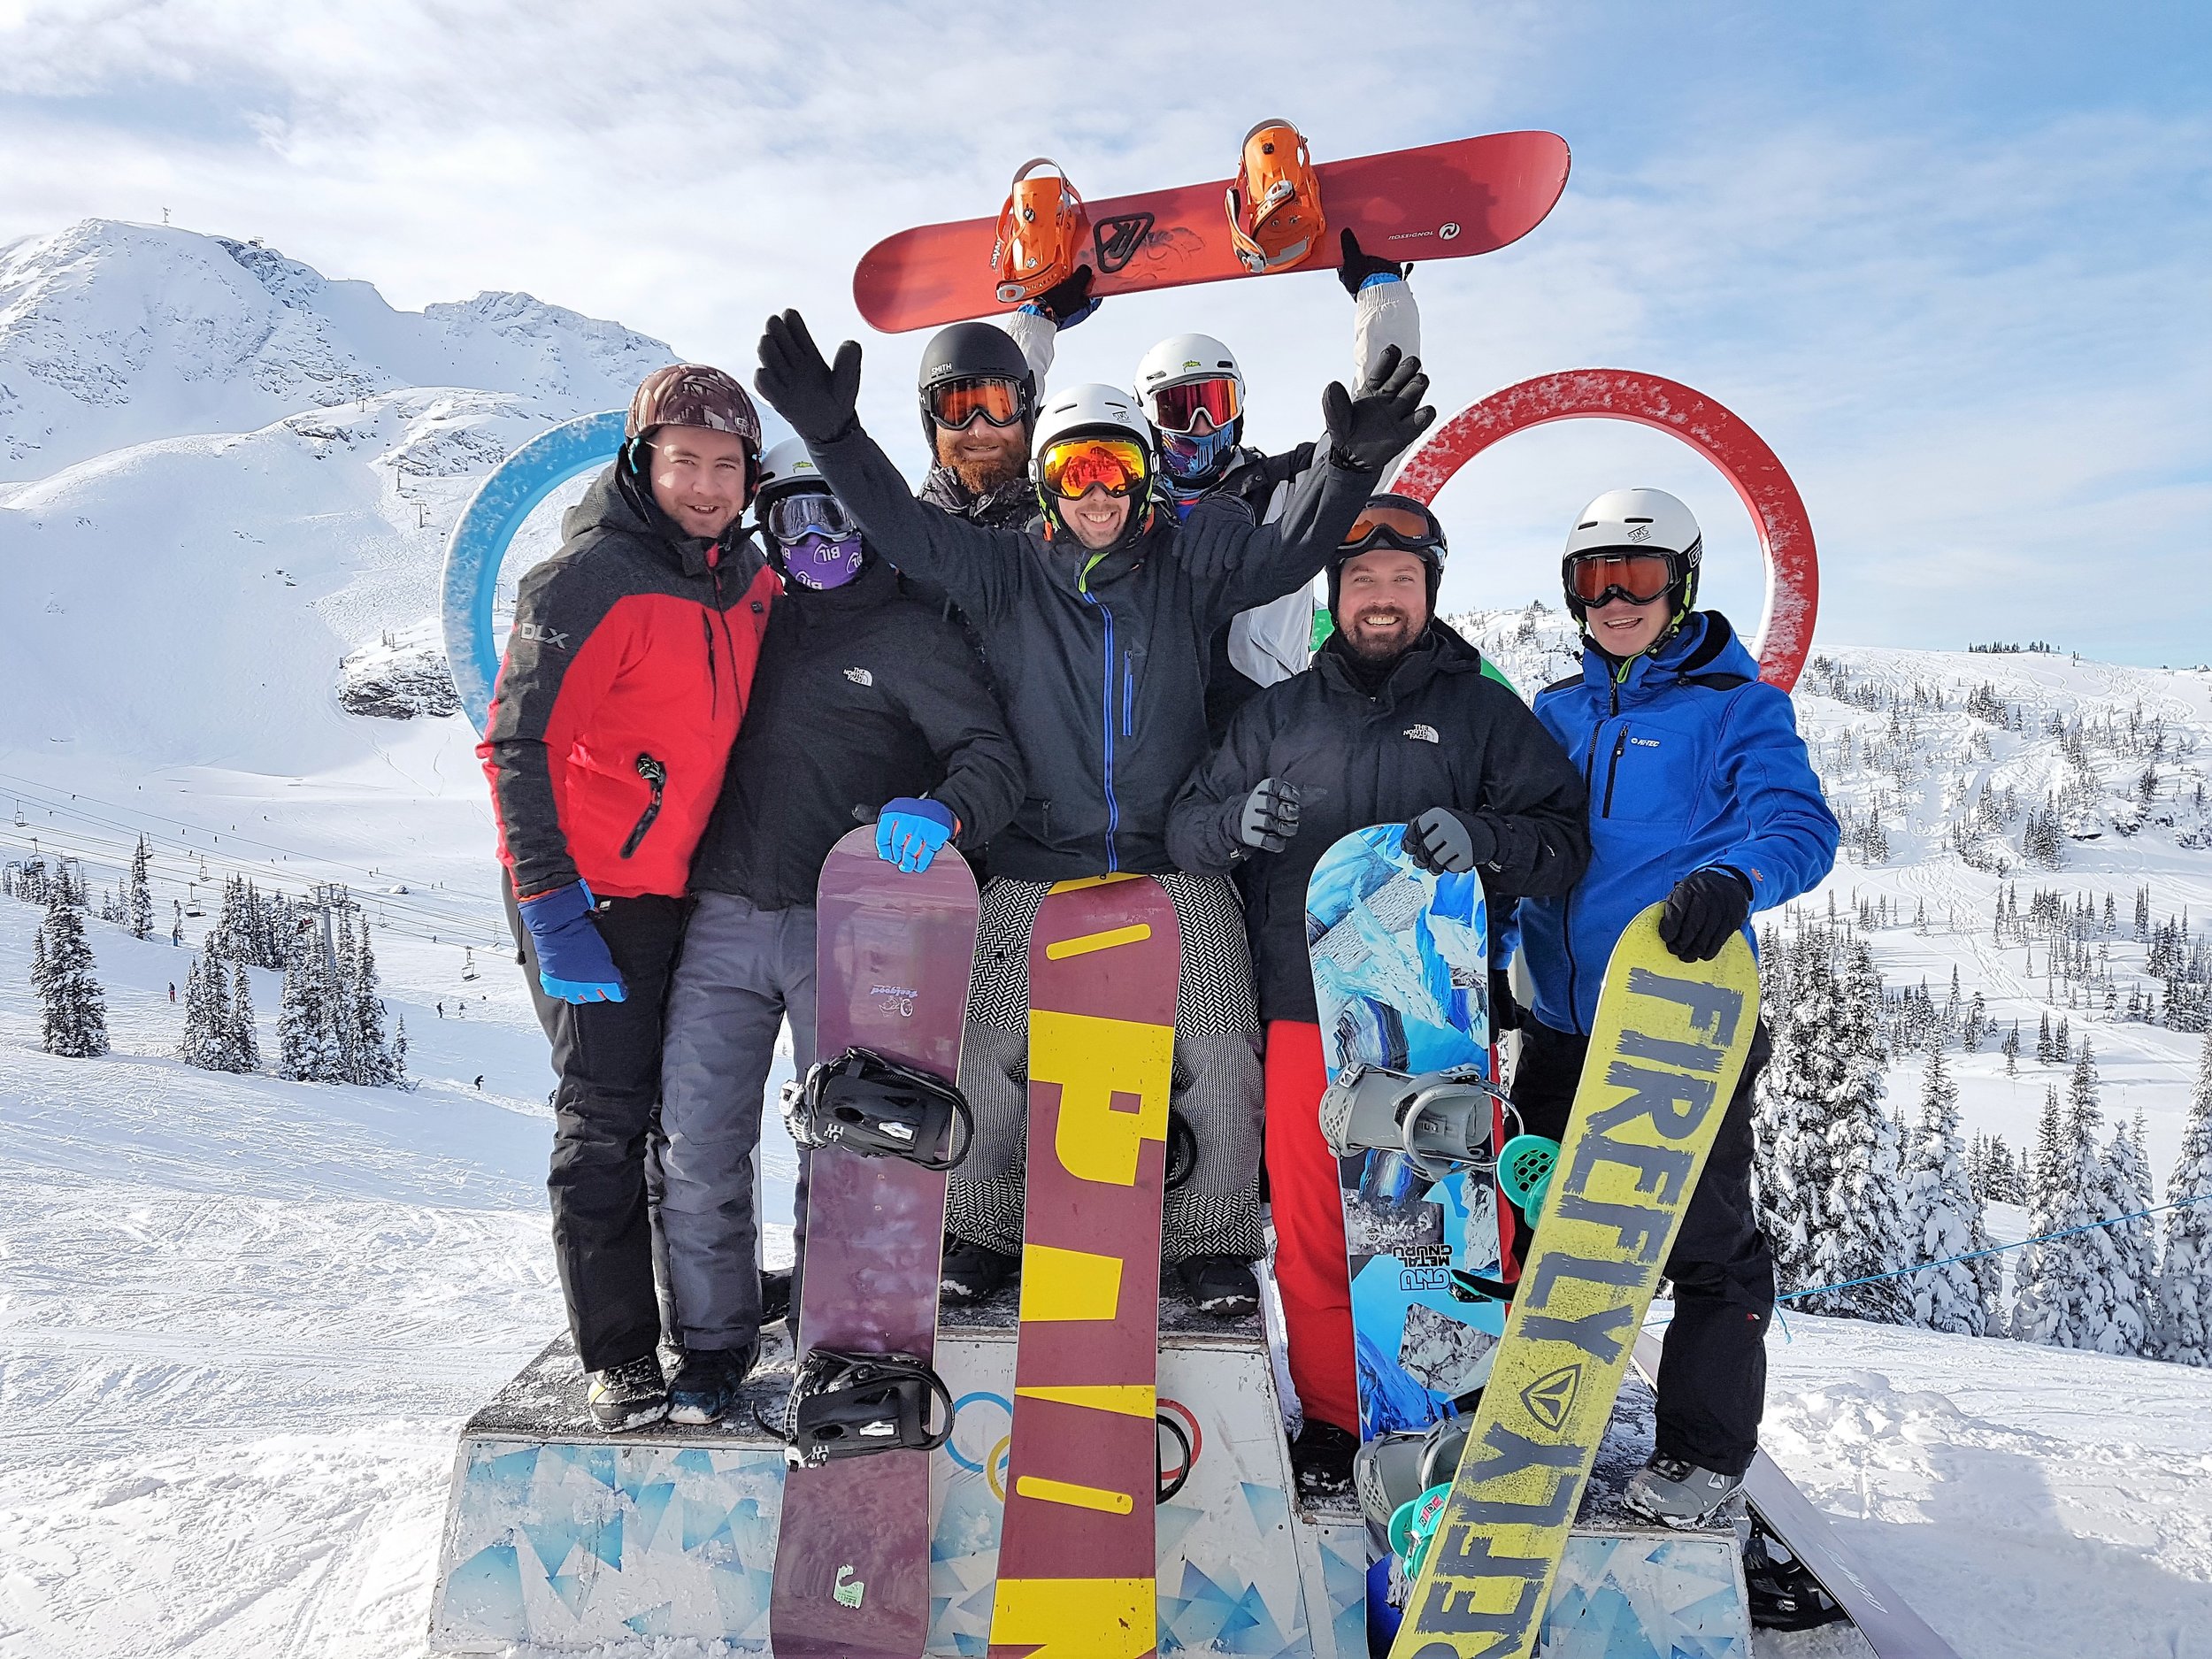 Group photo of snowboarders infront of the logo of the Olympic Games of 2010